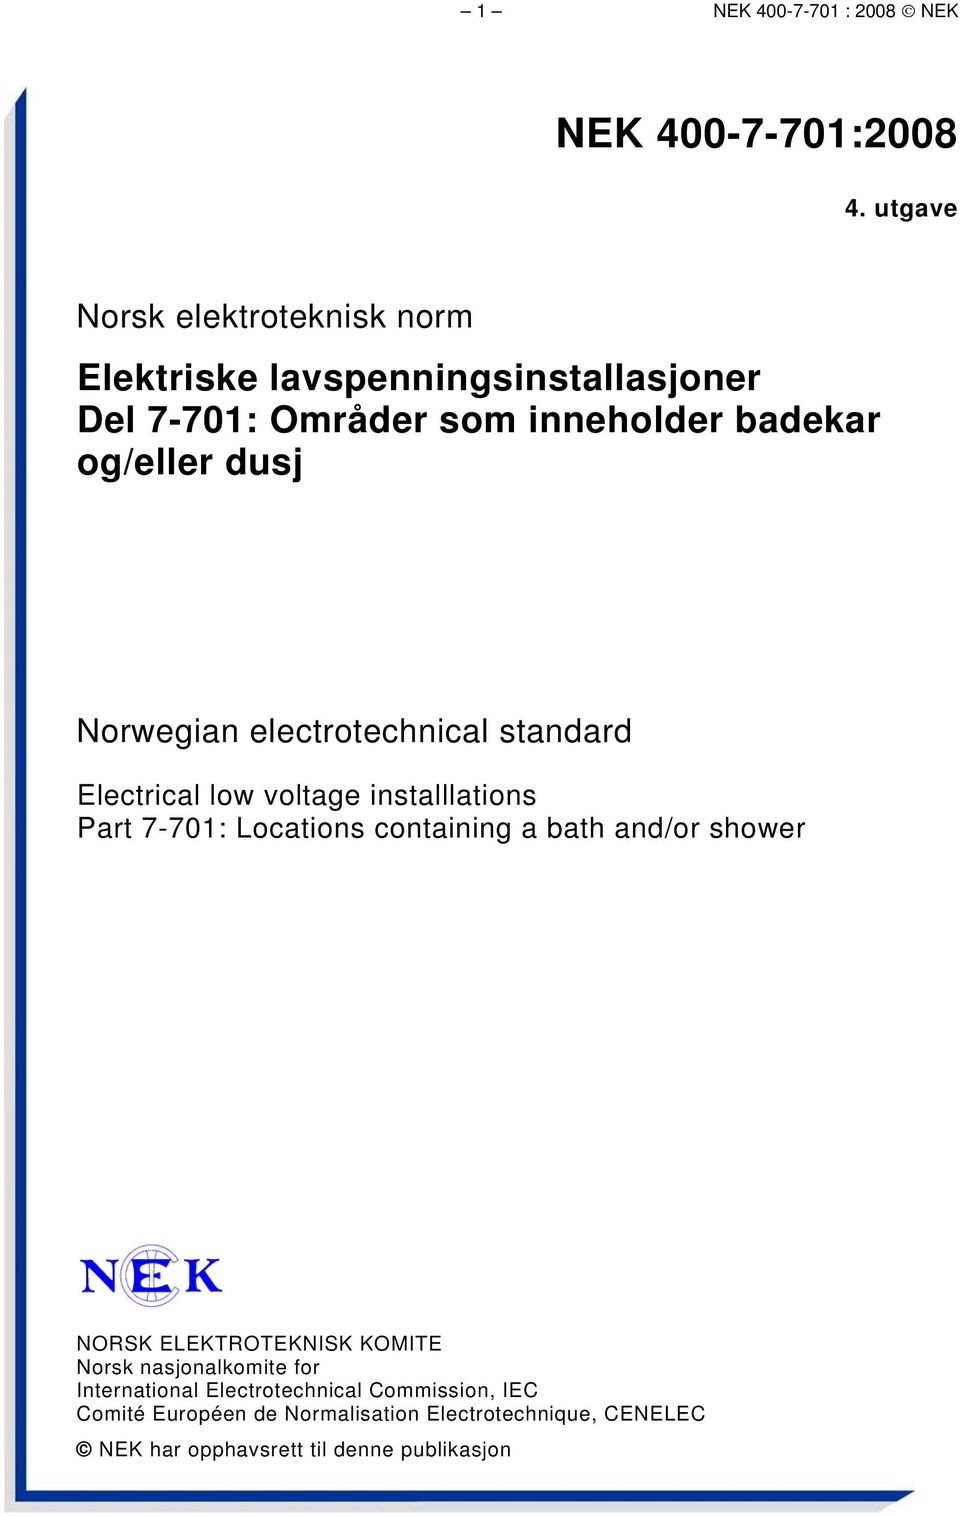 dusj Norwegian electrotechnical standard Electrical low voltage installlations Part 7-701: Locations containing a bath and/or